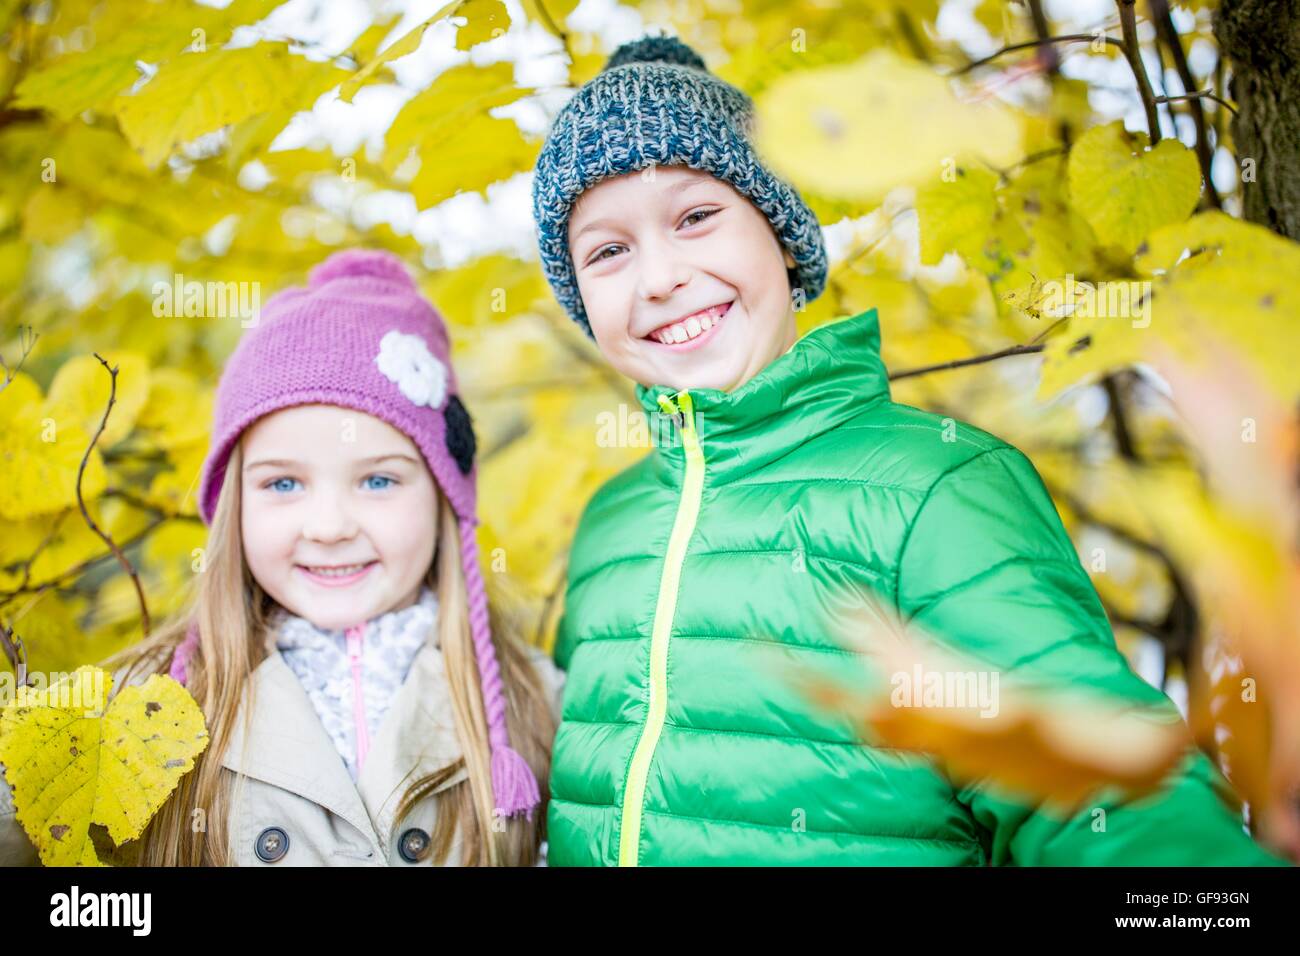 MODEL RELEASED. Children standing beside autumn plants and smiling, portrait. Stock Photo